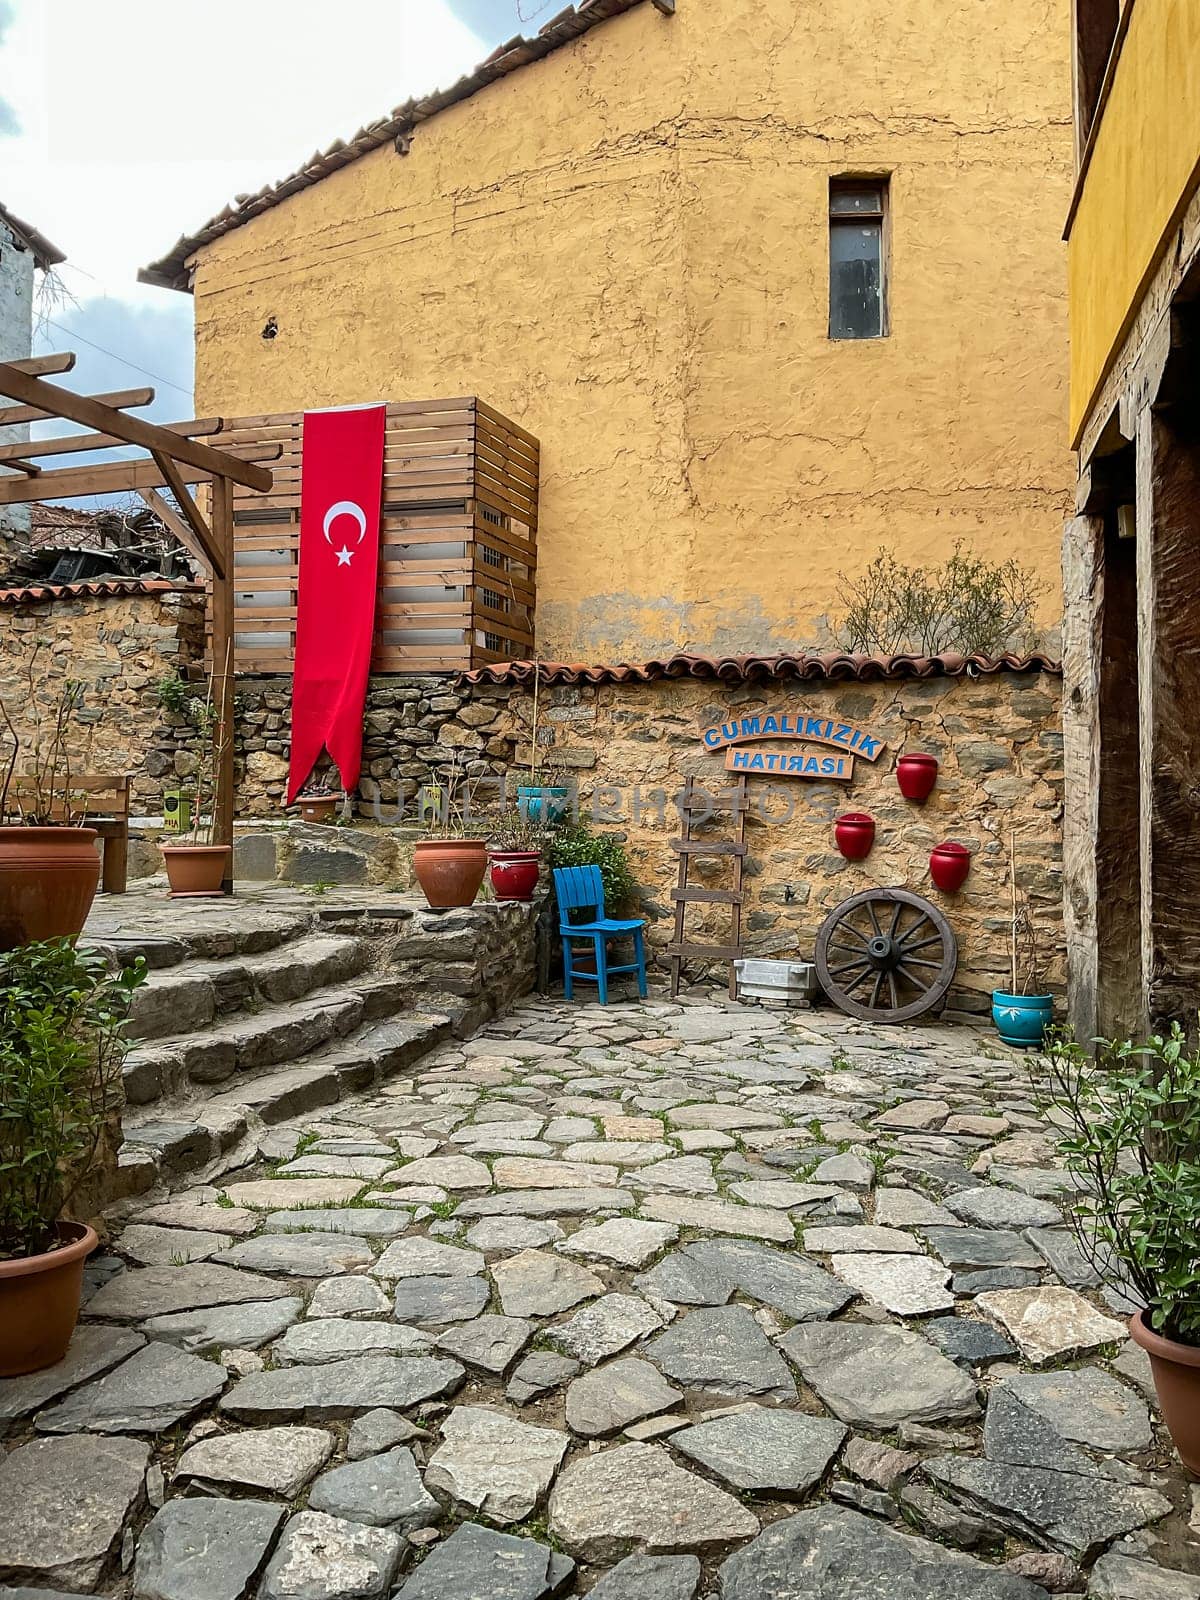 Cumalikizik village is a 700 years old Ottoman village in Turkey. Old Ottoman village in Bursa city, Turkey. Narrow street with old Ottoman houses and turkish flag